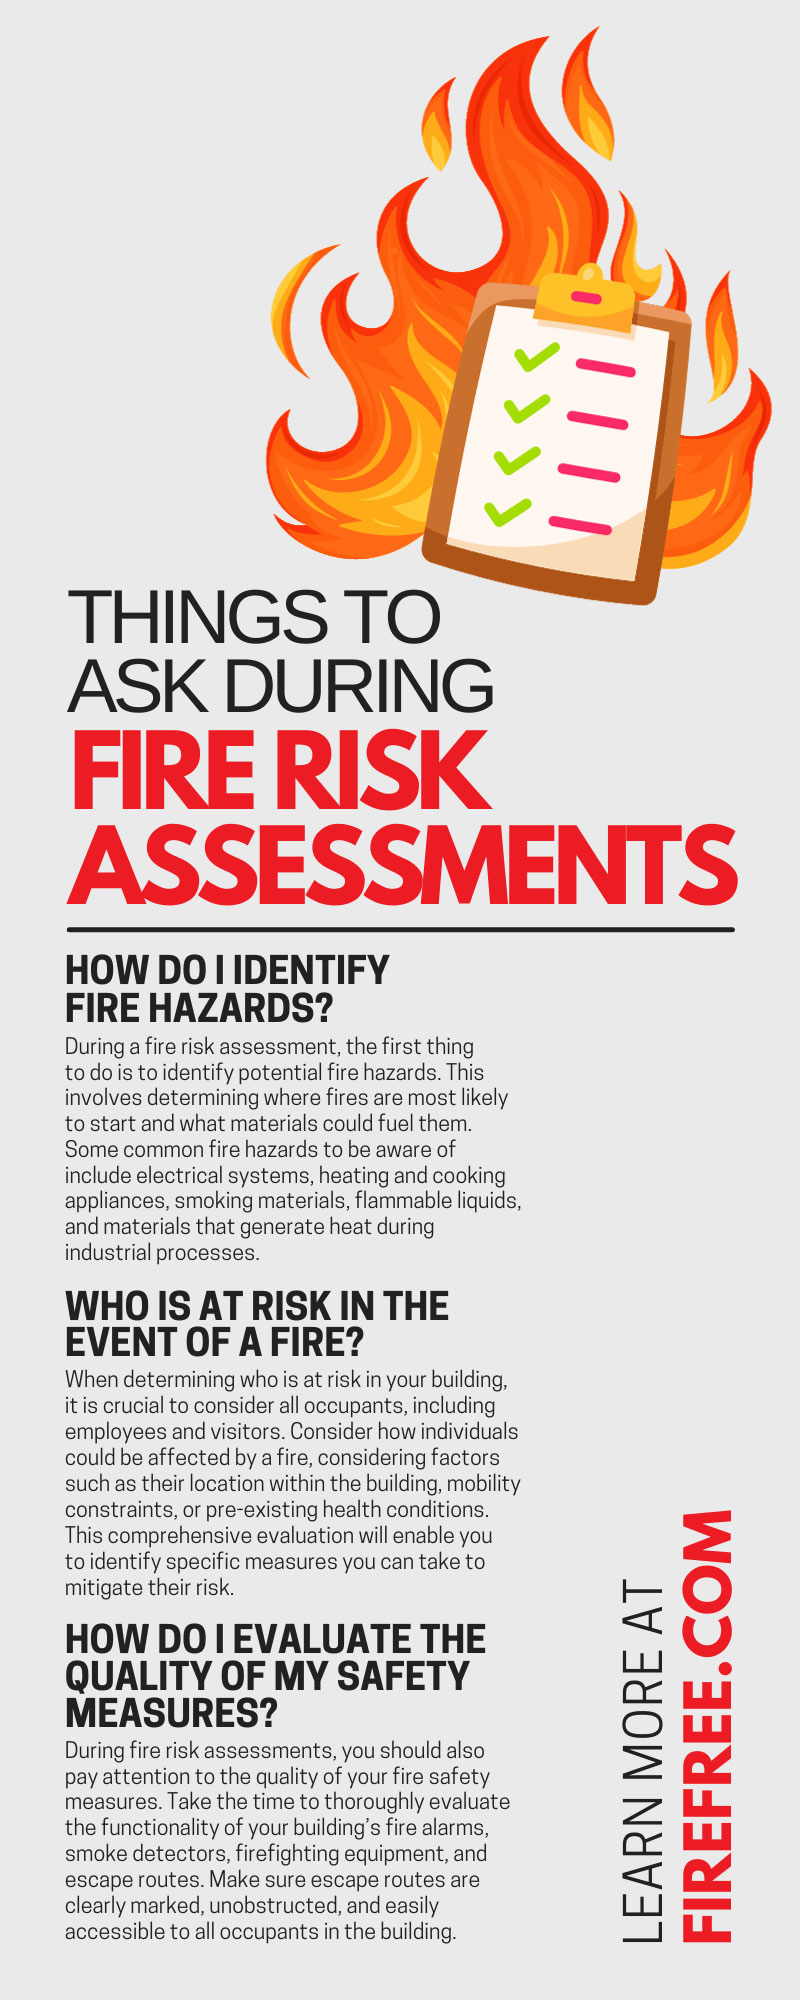 5 Things To Ask During Fire Risk Assessments